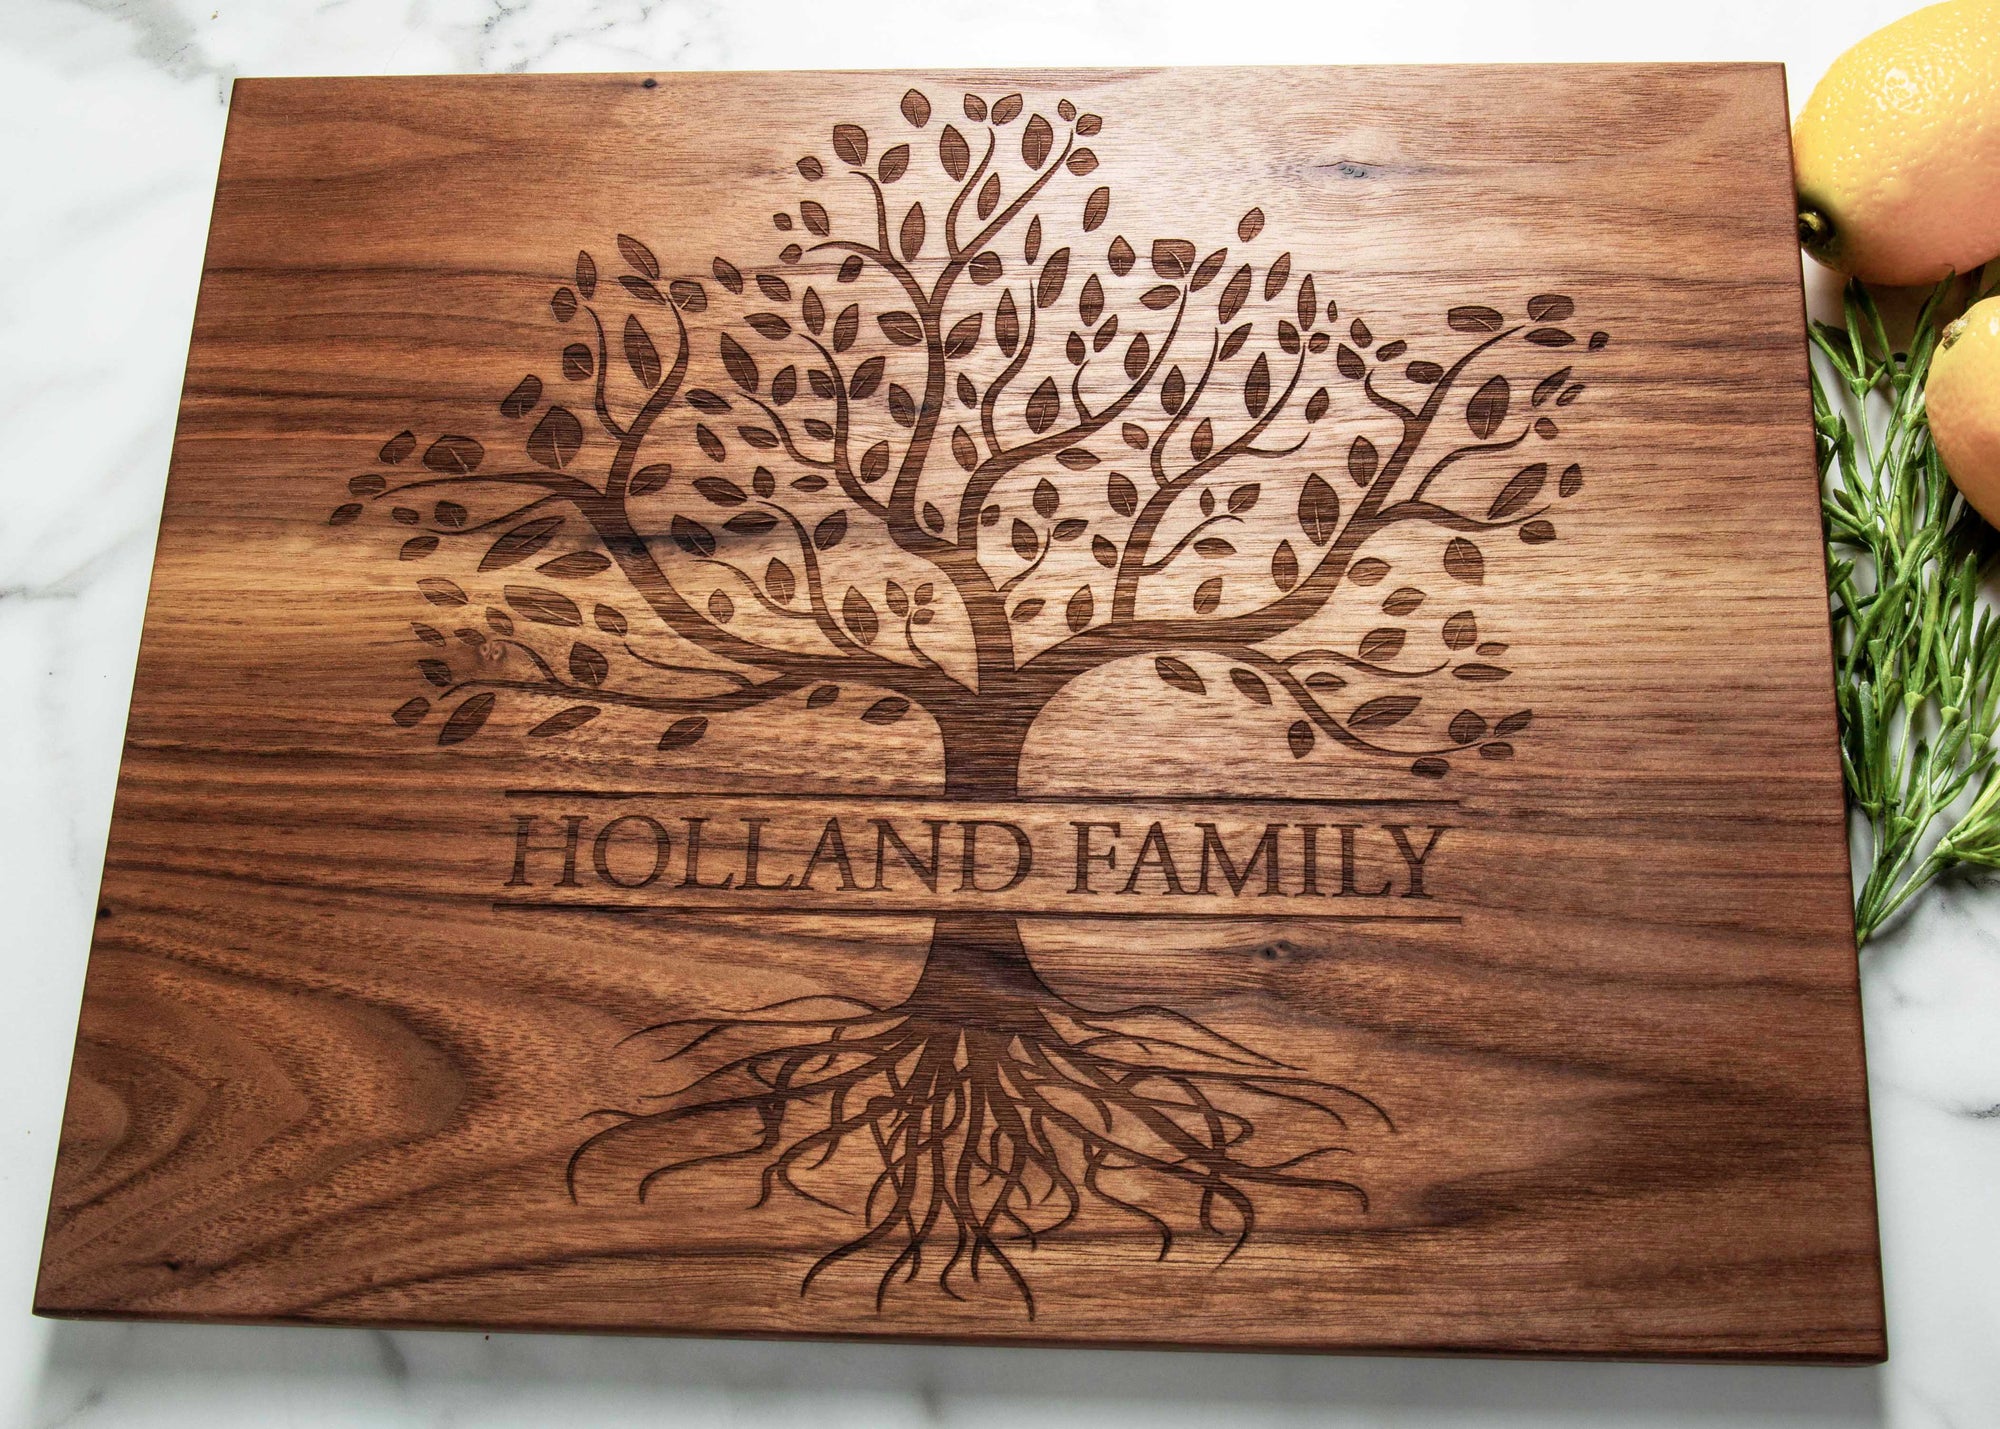 This handmade greeting card is made with a unique, artistic oak tree design with the couple's family last name, making it a meaningful couples gift for weddings, anniversaries, or house warmings. Celebrate true love with this beautiful, one-of-a-kind keepsake.